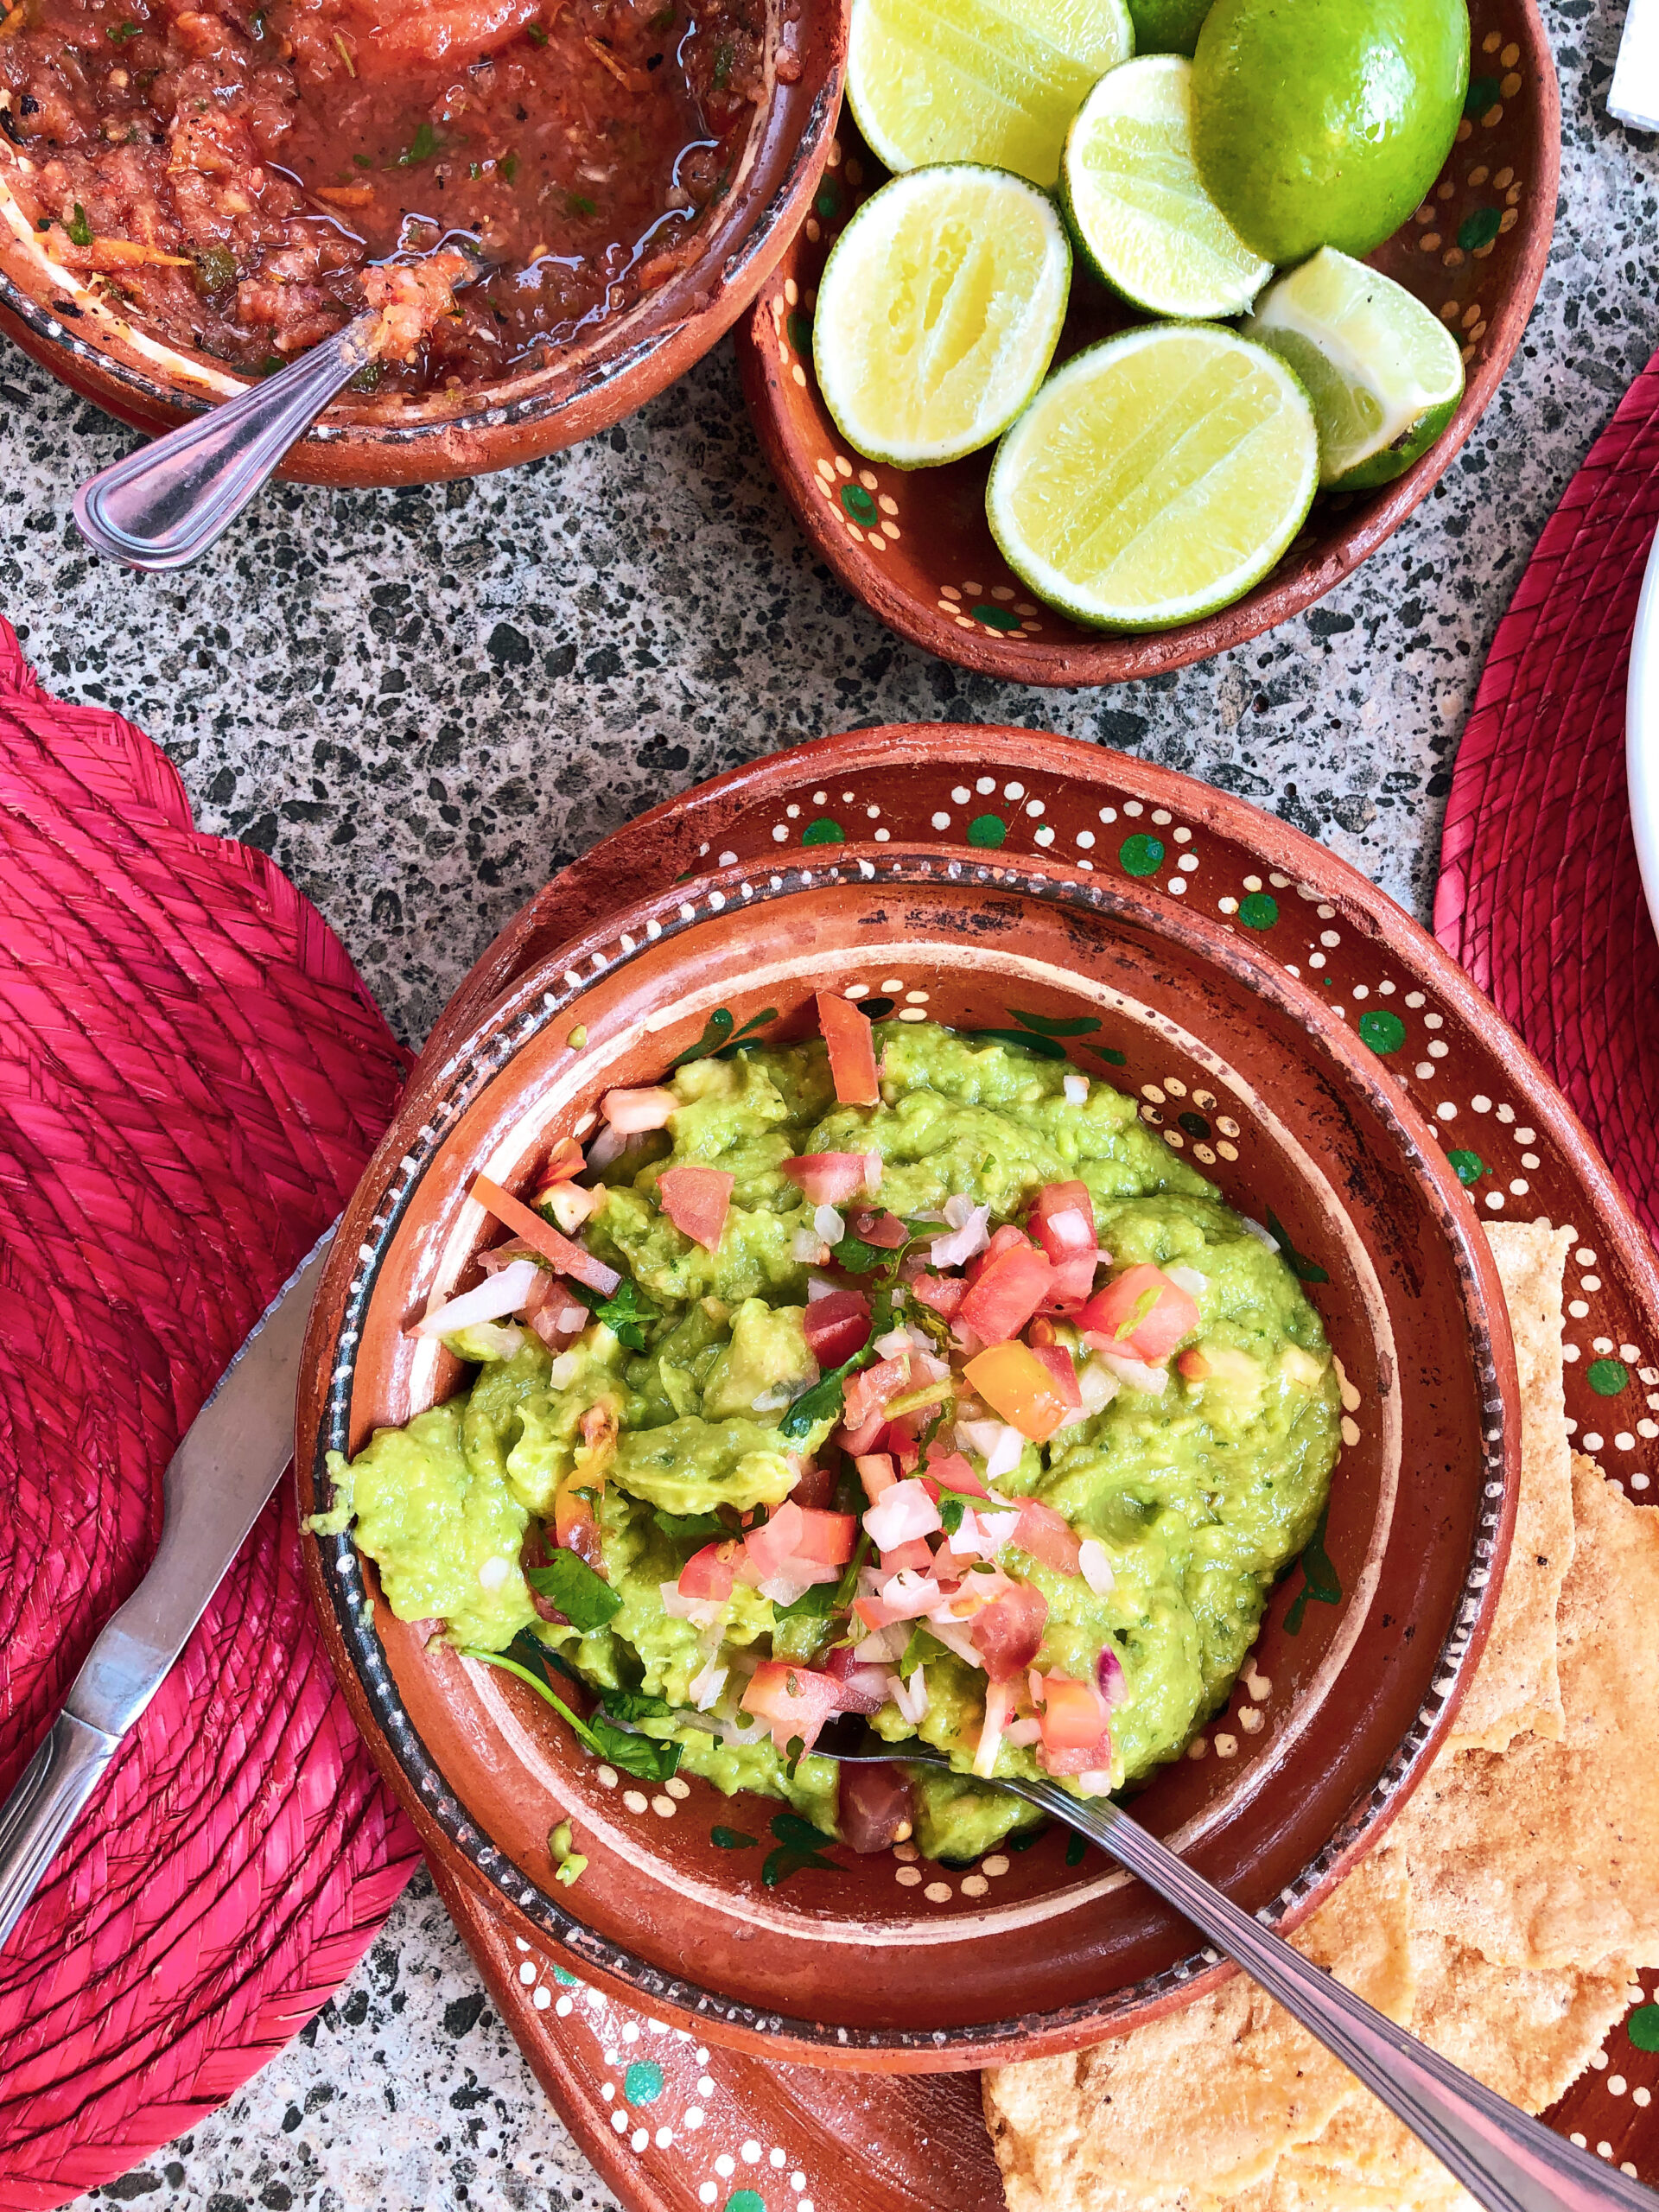 guacamole, salsa and limes at Cholula restaurant in Tequila